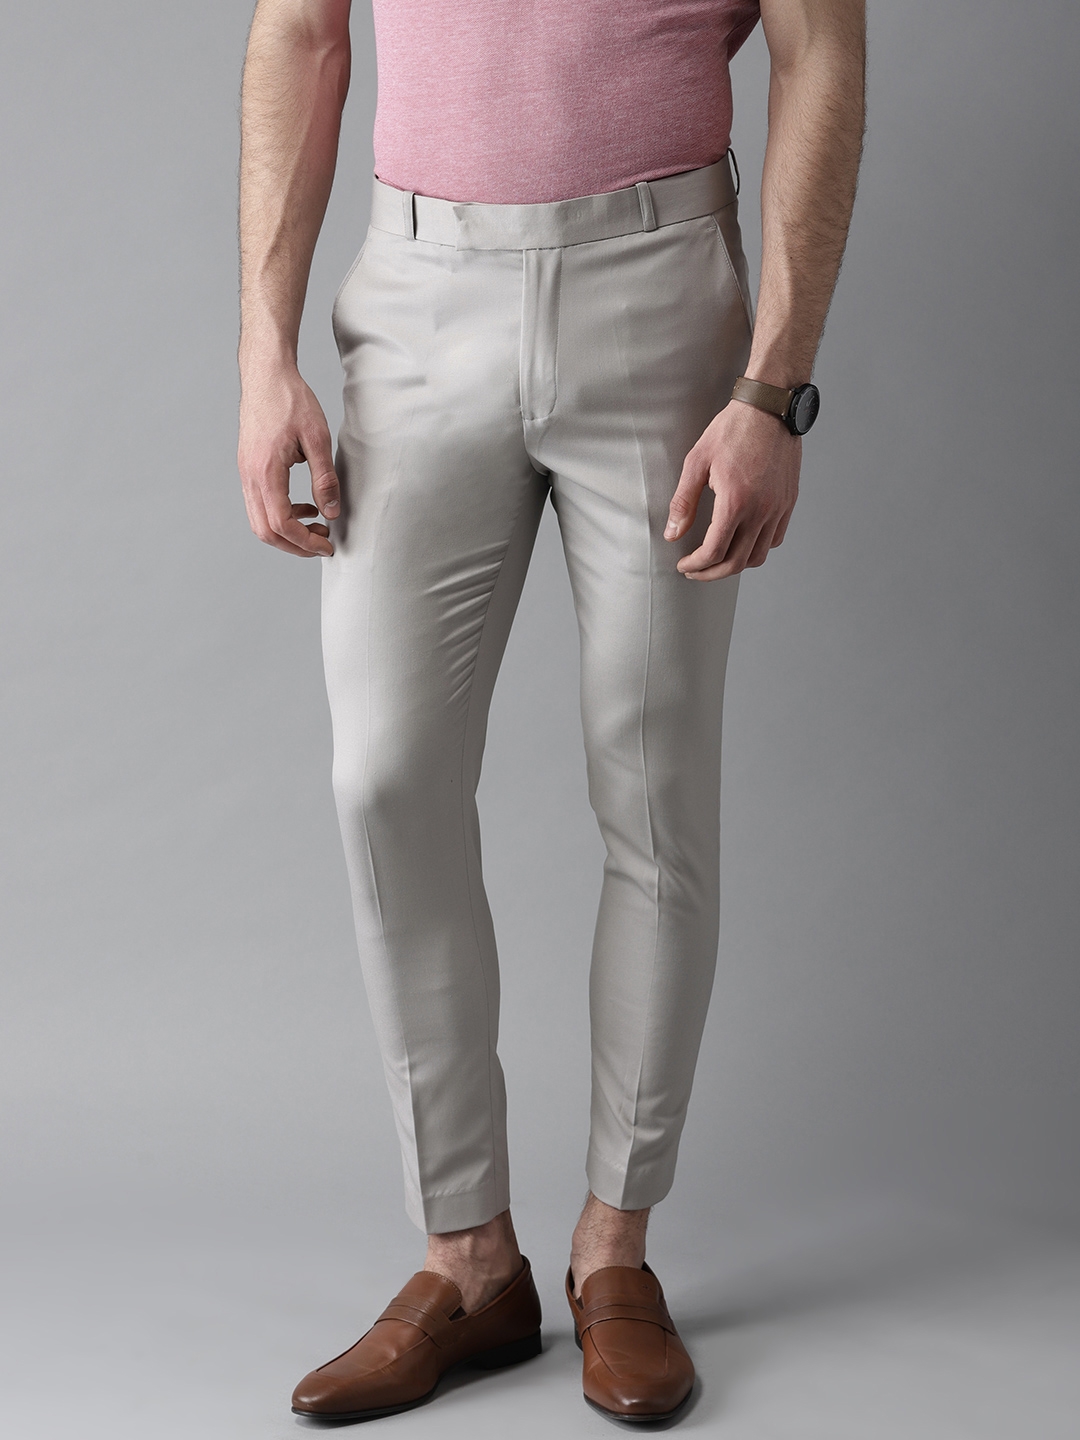 Aggregate more than 136 grey trousers mens latest